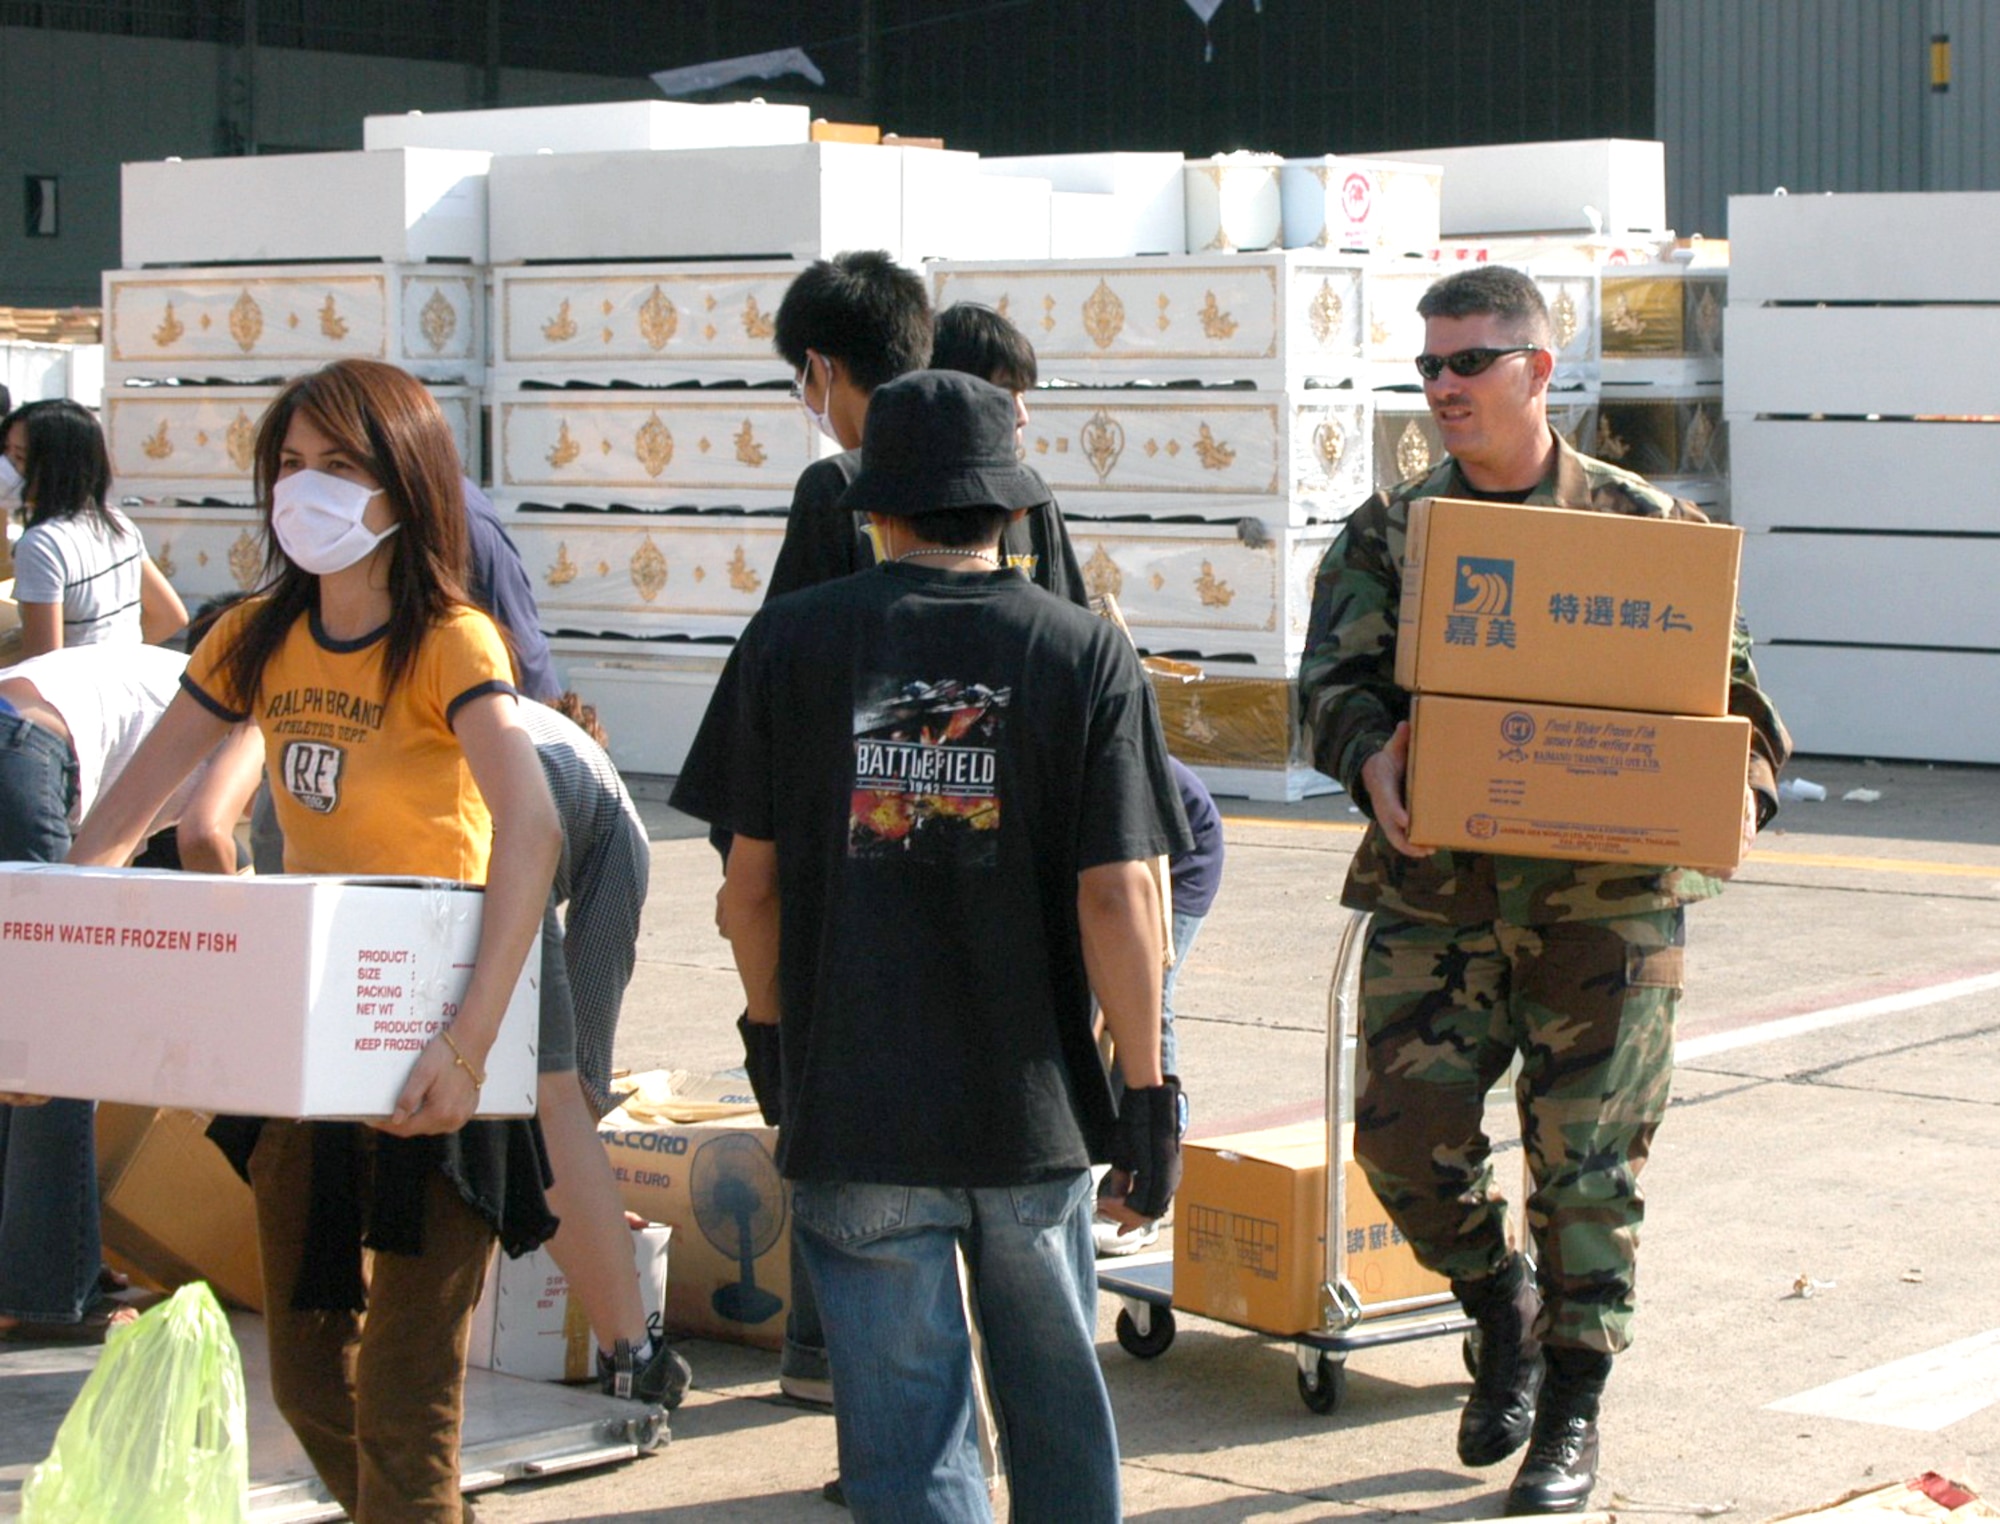 BANGKOK, Thailand -- An Airman here carries boxes of relief supplies Jan. 1 at the international airport.  He and 100 others from the 353rd Special Operations Group are flying supplies to the tsunami-hit areas of southern Thailand.  In the background are hundreds of caskets.  The 353rd SOG Airmen are assigned to Kadena Air Base, Japan.  (U.S. Air Force photo by Master Sgt. Michael Farris)